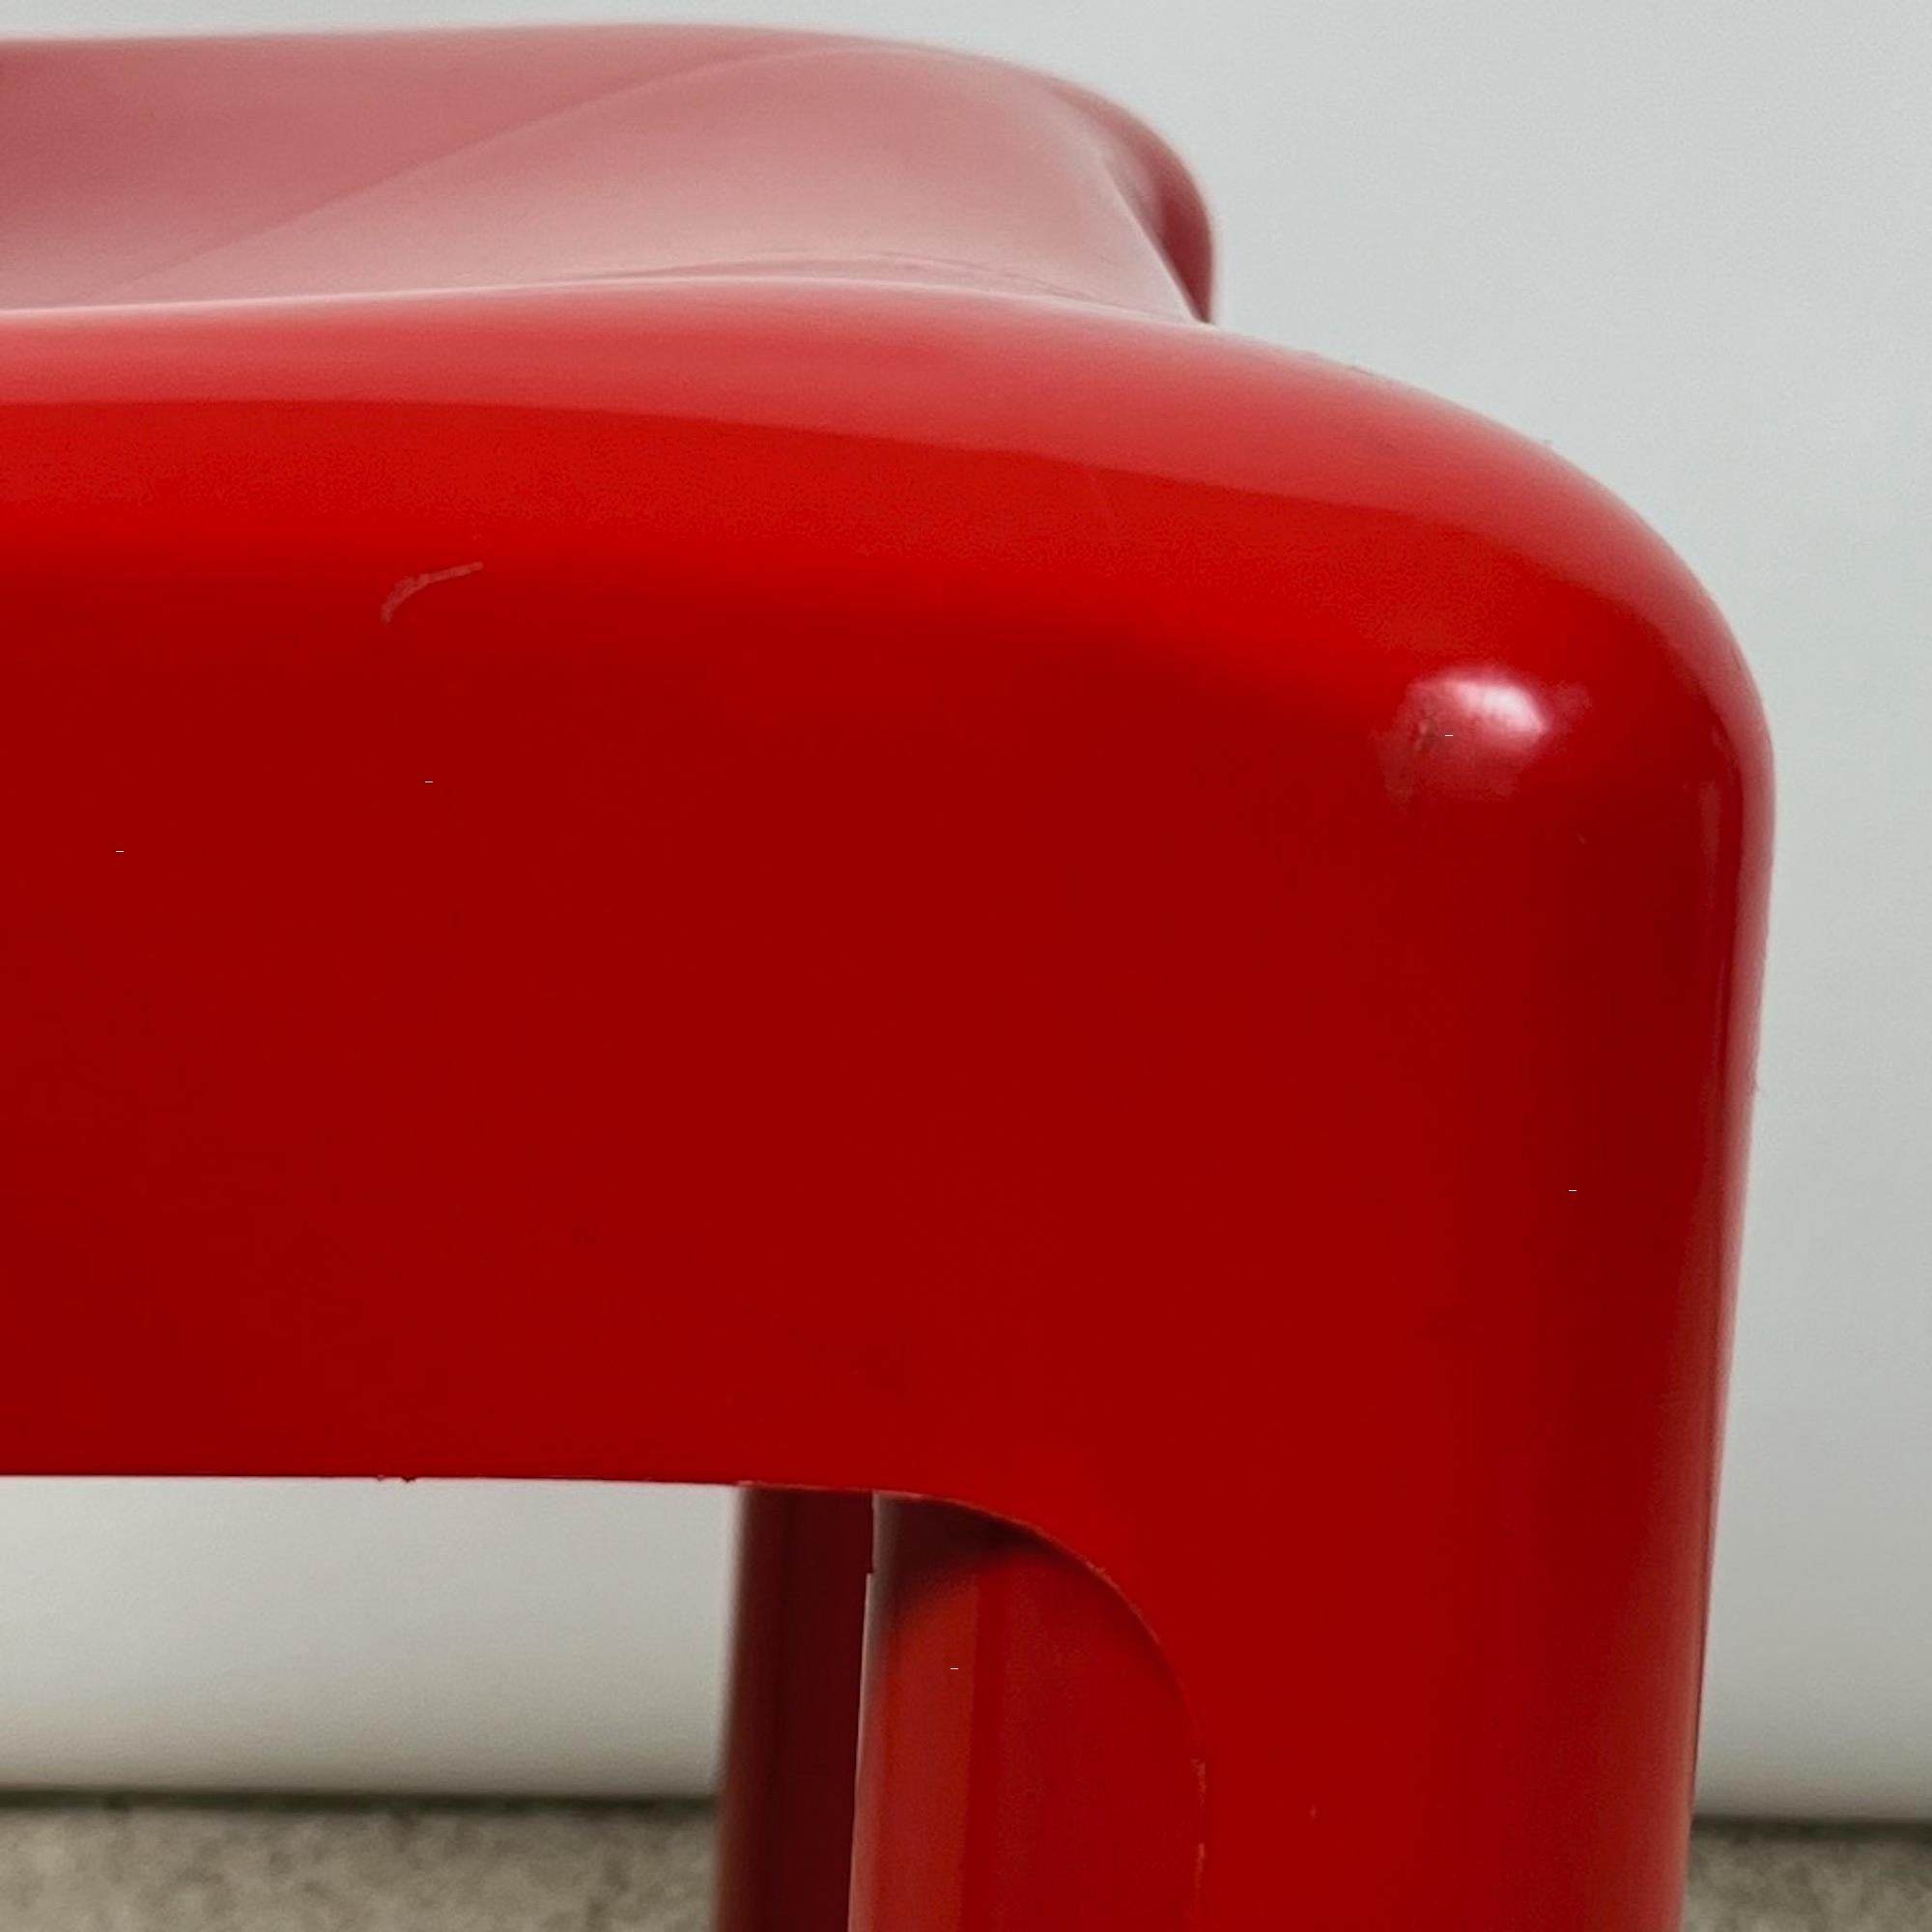 Plastic Kartell 4875 Chair by Carlo Bartoli in Glossy Red, 1980s Edition For Sale